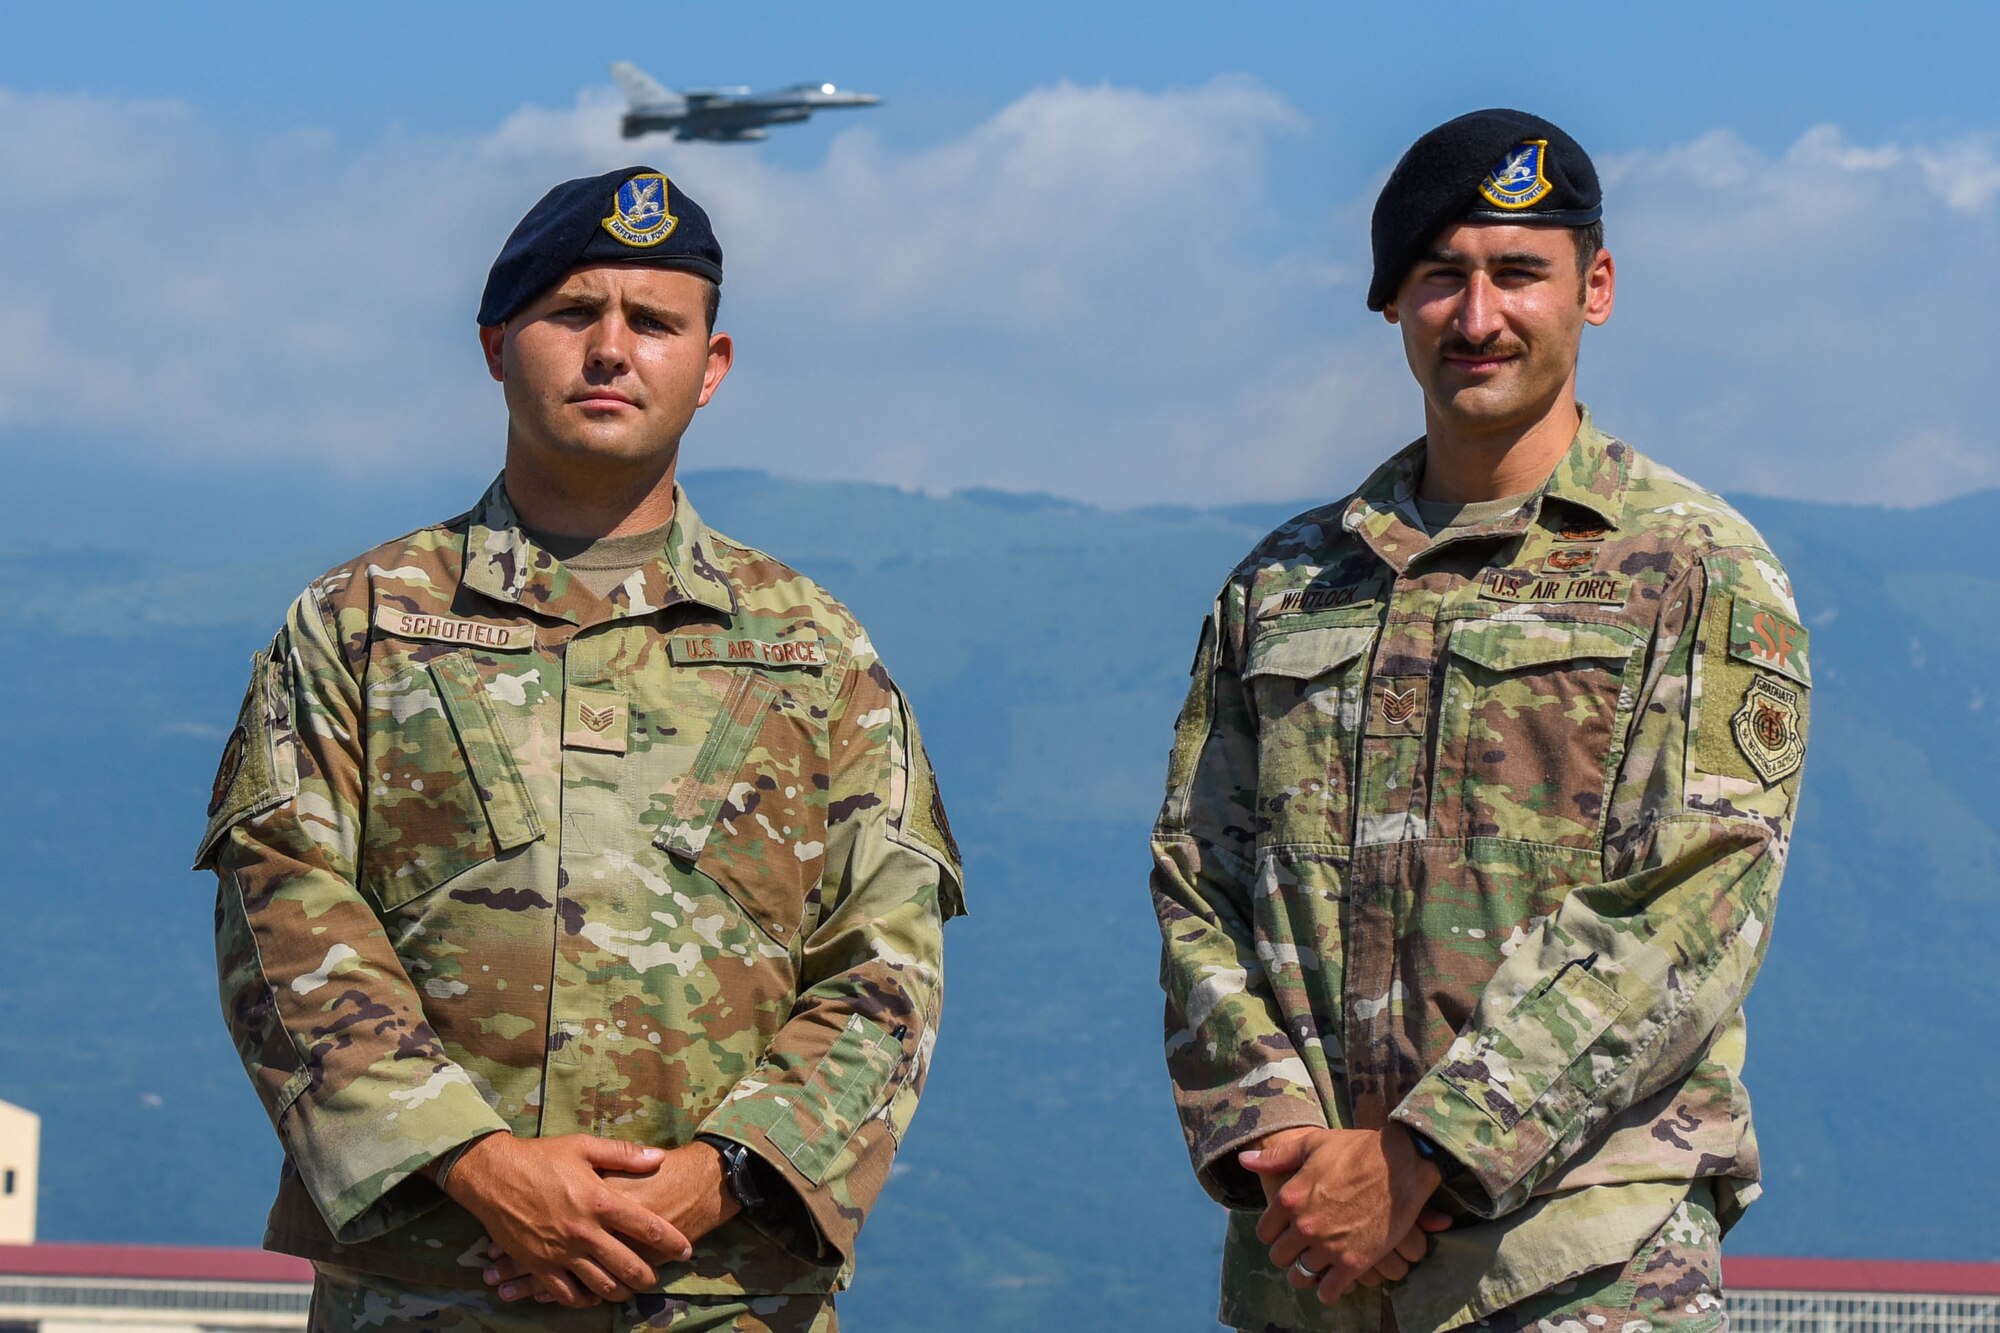 U.S. Air Force Staff Sgt. Levi Schofield, 31st Security Forces Squadron fire team leader, left, and Tech. Sgt.. Jordan Whitlock, 31st SFS squad leader, pose for a photo on the flight line at Aviano Air Base, Italy, July 7, 2021. Whitlock, Schofield and U.S. Air Force Master Sgt. Mario Vaiese, 31st SFS team leader, responded to a head-on collision involving a van and four Moroccan nationals on two mopeds during a temporary duty travel (TDY) in Ben Guerir, Morocco, for exercise AFRICAN LION, June 11, 2021. (U.S. Air Force photo by Airman 1st Class Brooke Moeder)